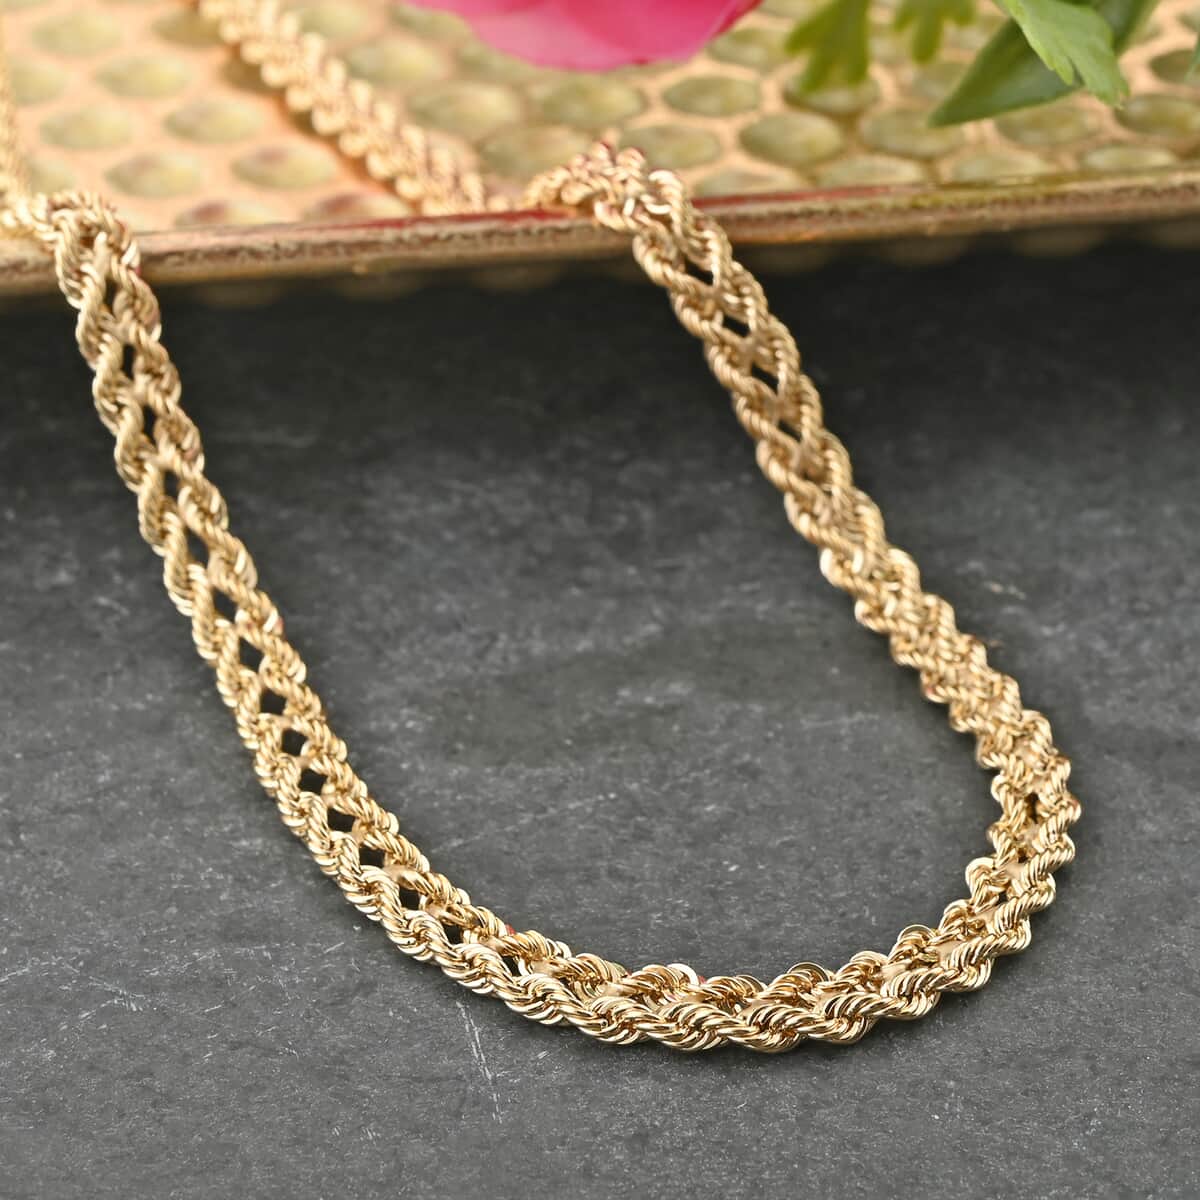 Buy Doorbuster 2 Strand Cuore Italian 10K Yellow Gold Rope Necklace 18 ...